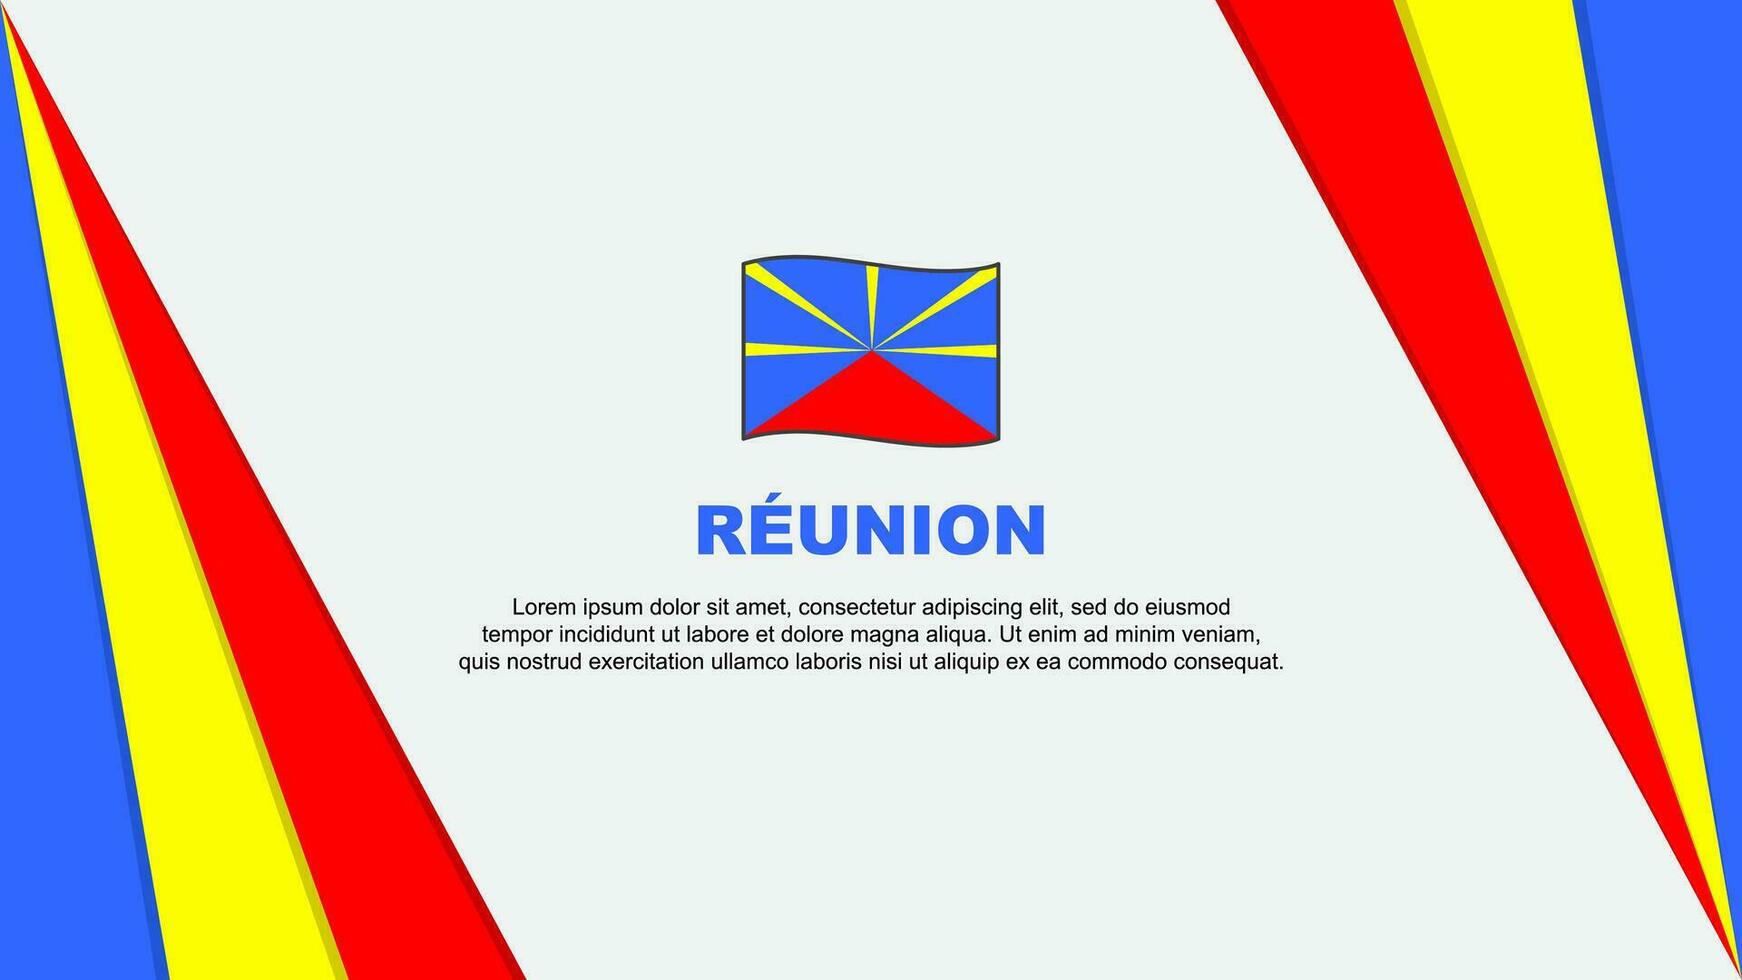 Reunion Flag Abstract Background Design Template. Reunion Independence Day Banner Cartoon Vector Illustration. Flag